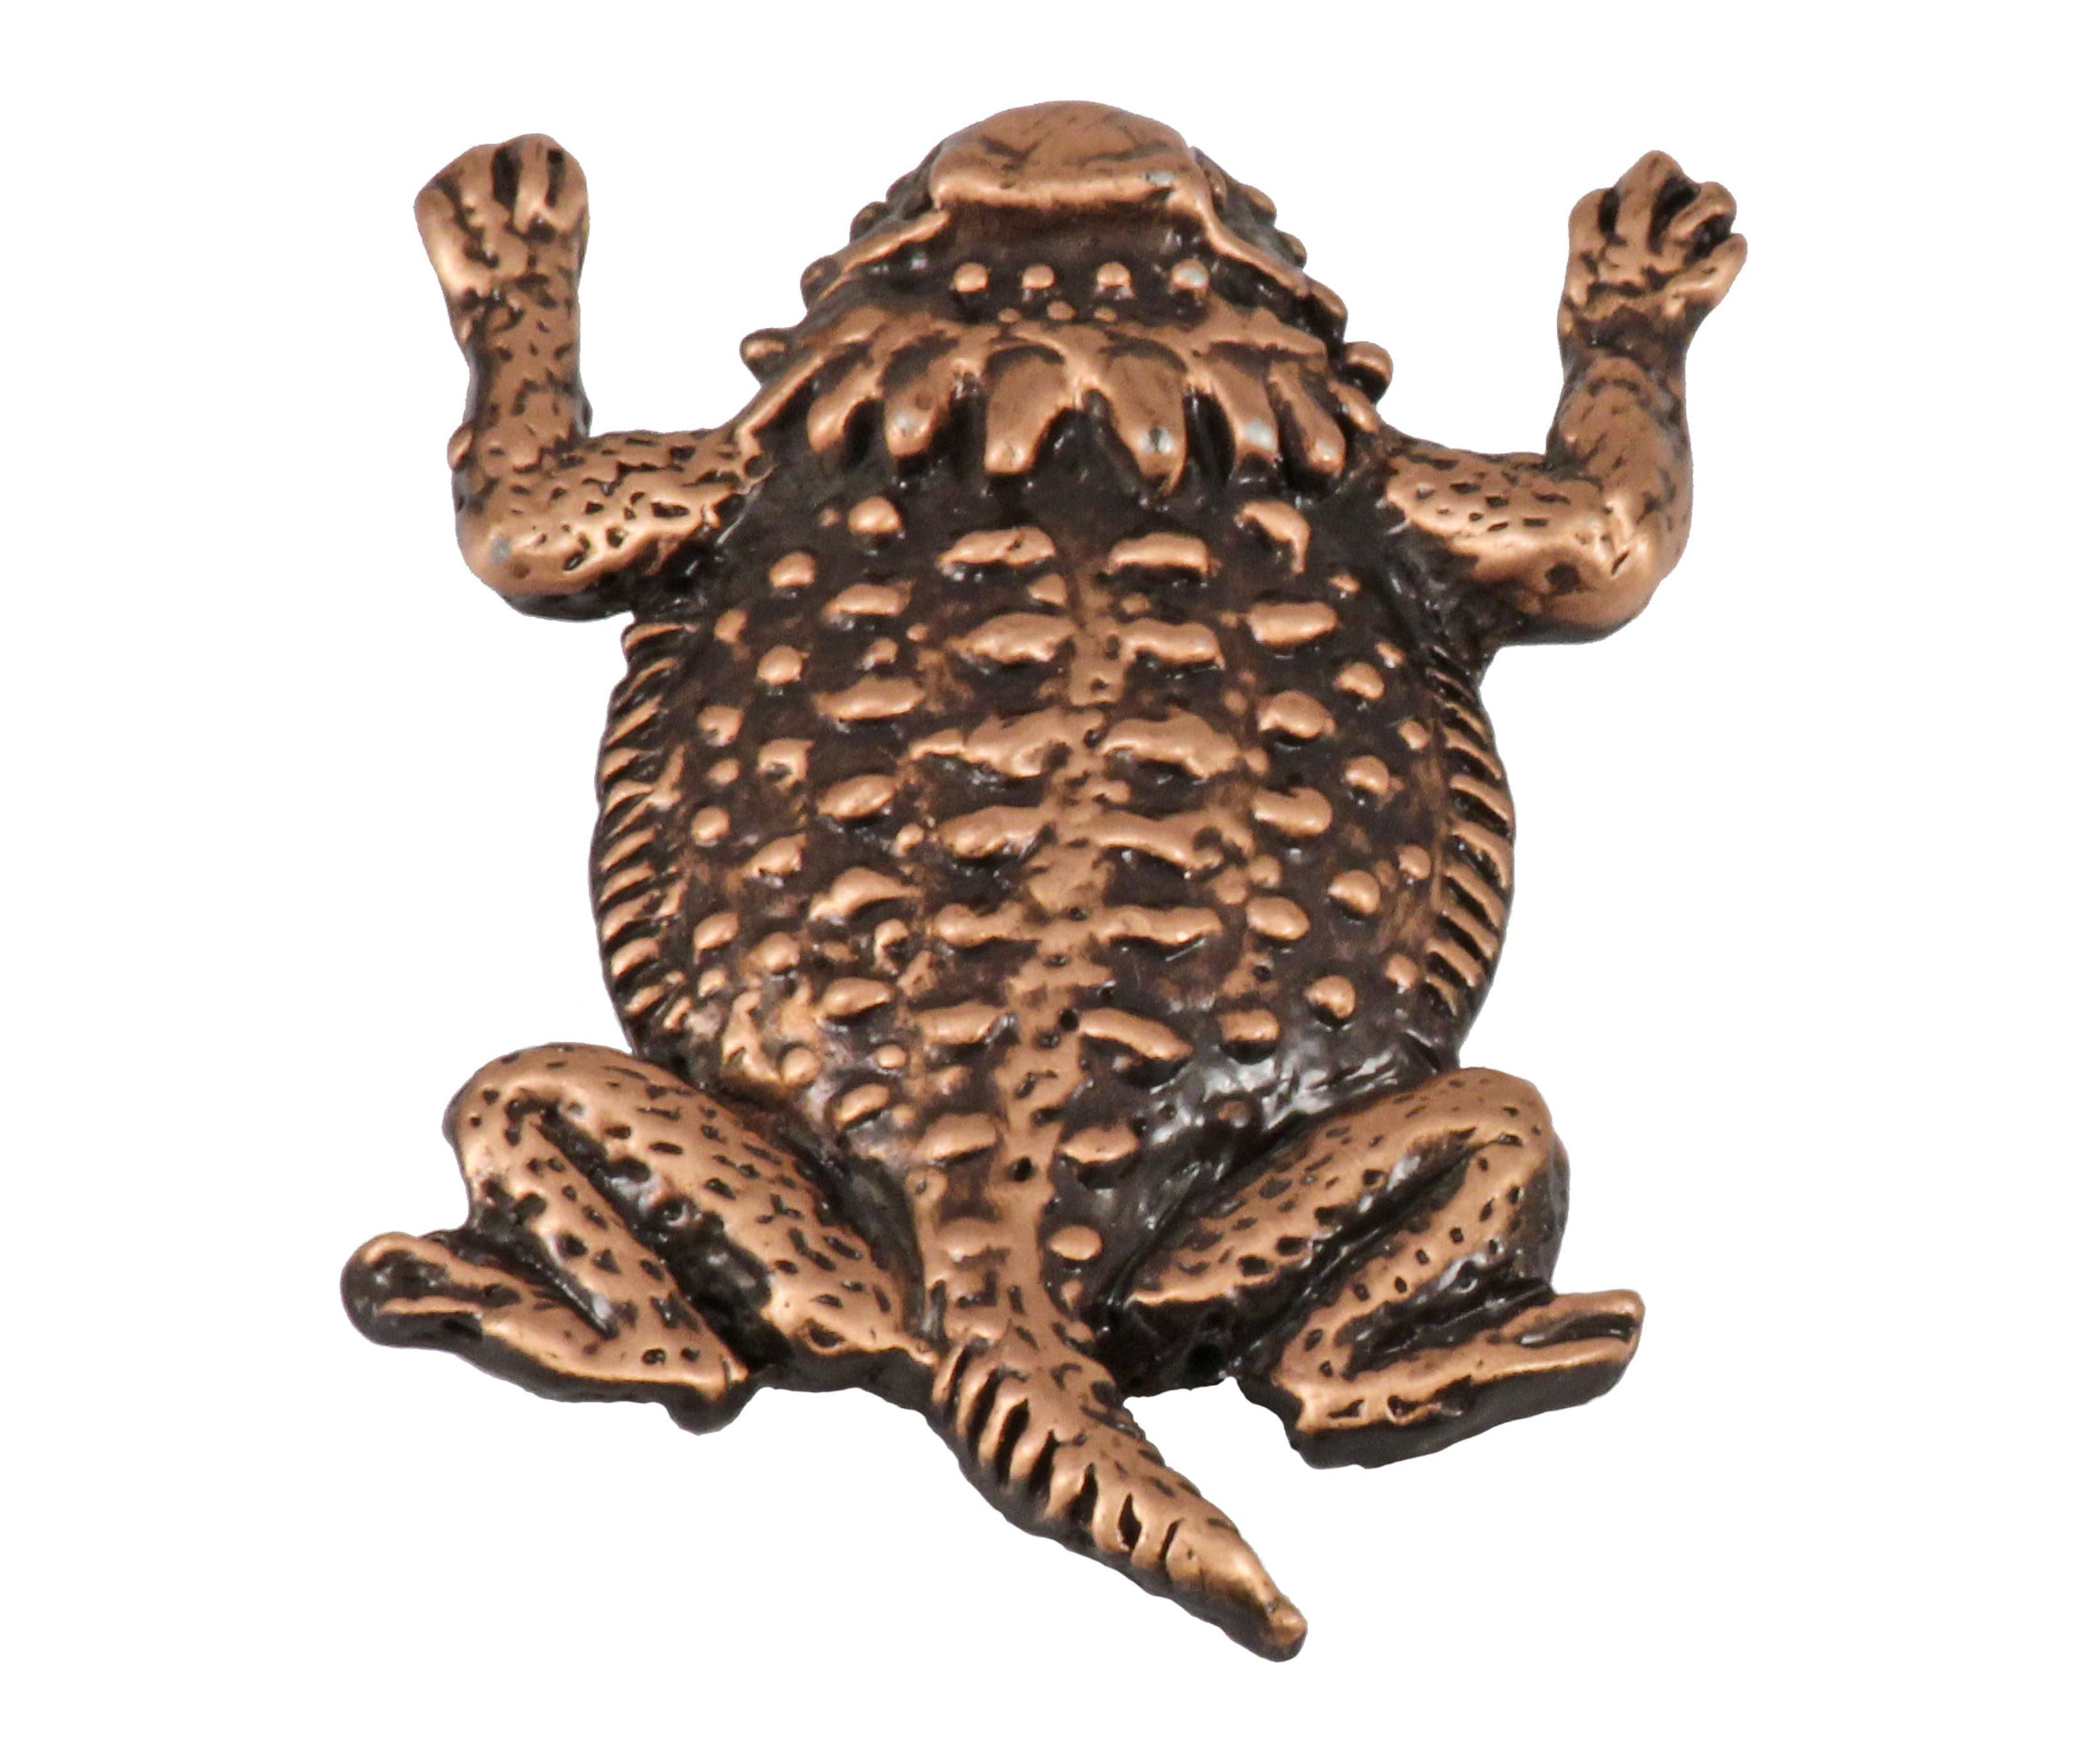 Horny Toad, Horned Lizards, Horned Frog, Reptile, Phrynosomatidae Reptiles,  Copper Plated, Hat, Lapel, Brooch, Pin, Pins, Made in USA, Over 30 Reptiles  Designs Available. Creative Pewter Designs.AC061 